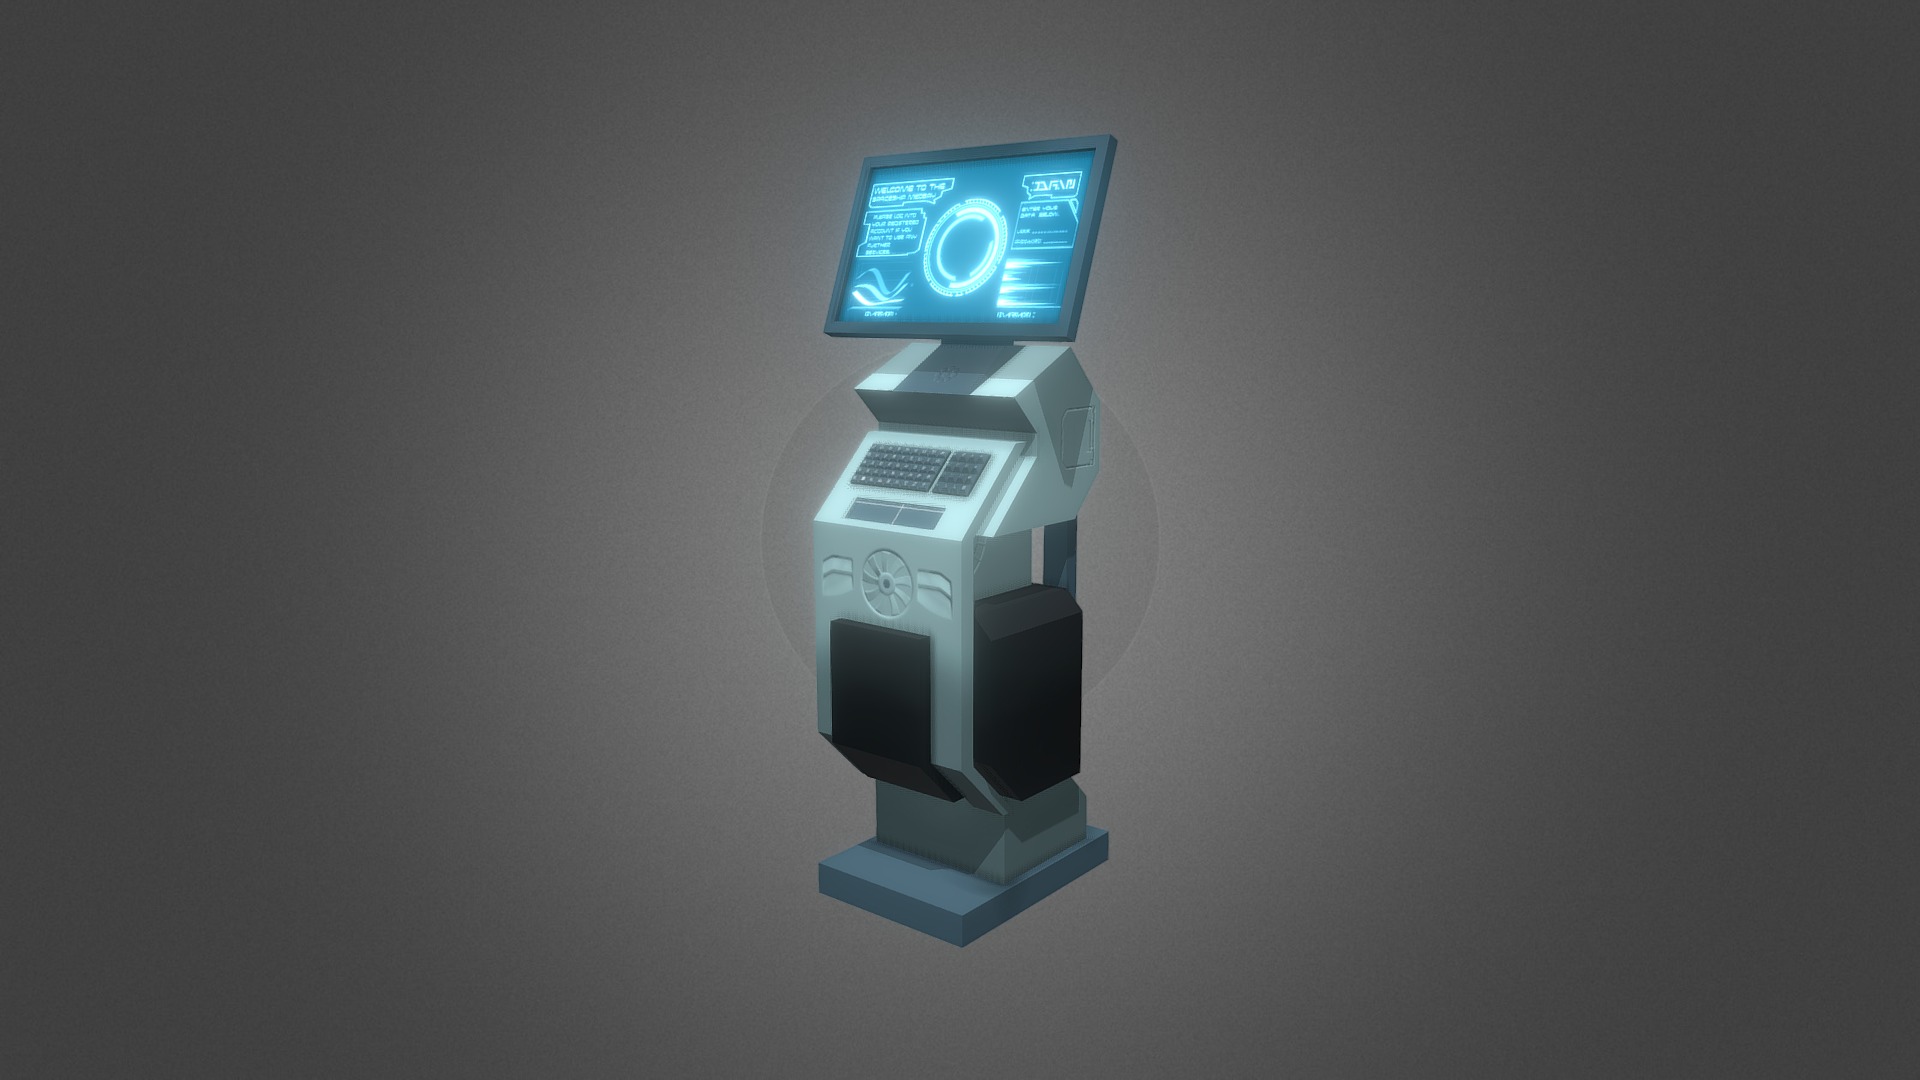 Trying to figure out a futuristic but simple PC design 3d model